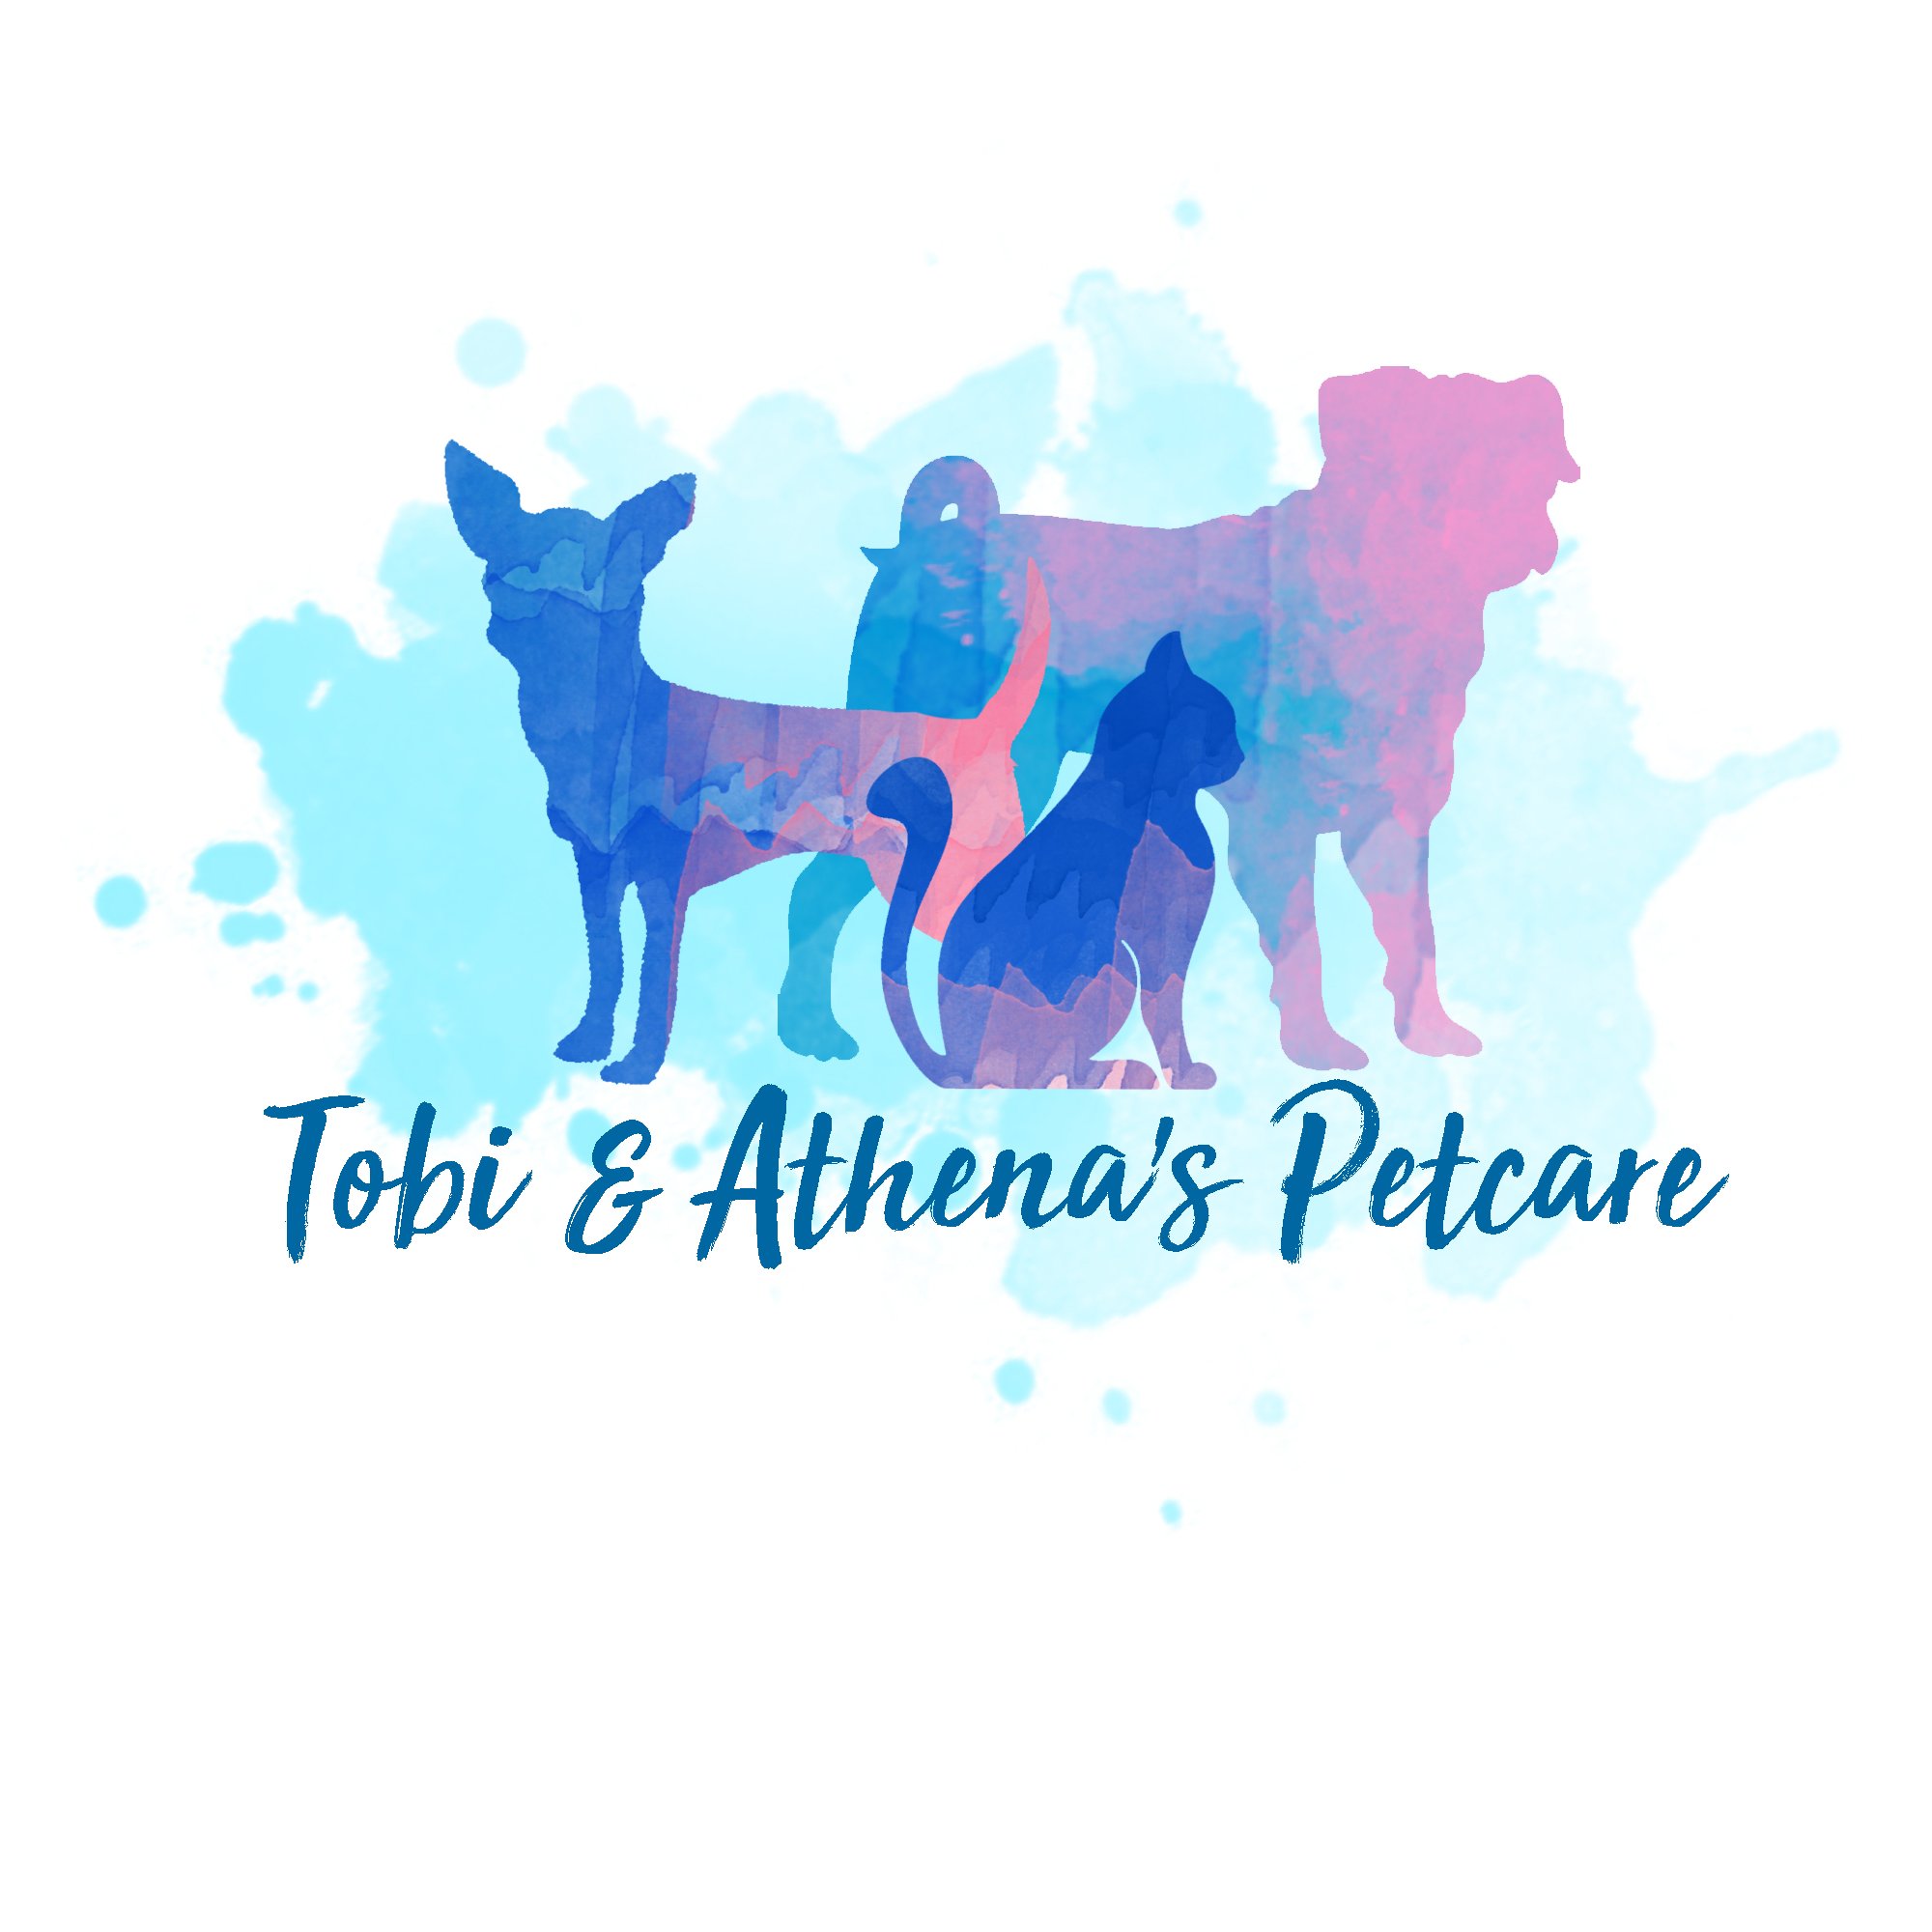 Contact us now for a customized pet care plan just for them. Exercise and energy level assessments. Diet Suggestions. Let us help you with your new furbabie!!